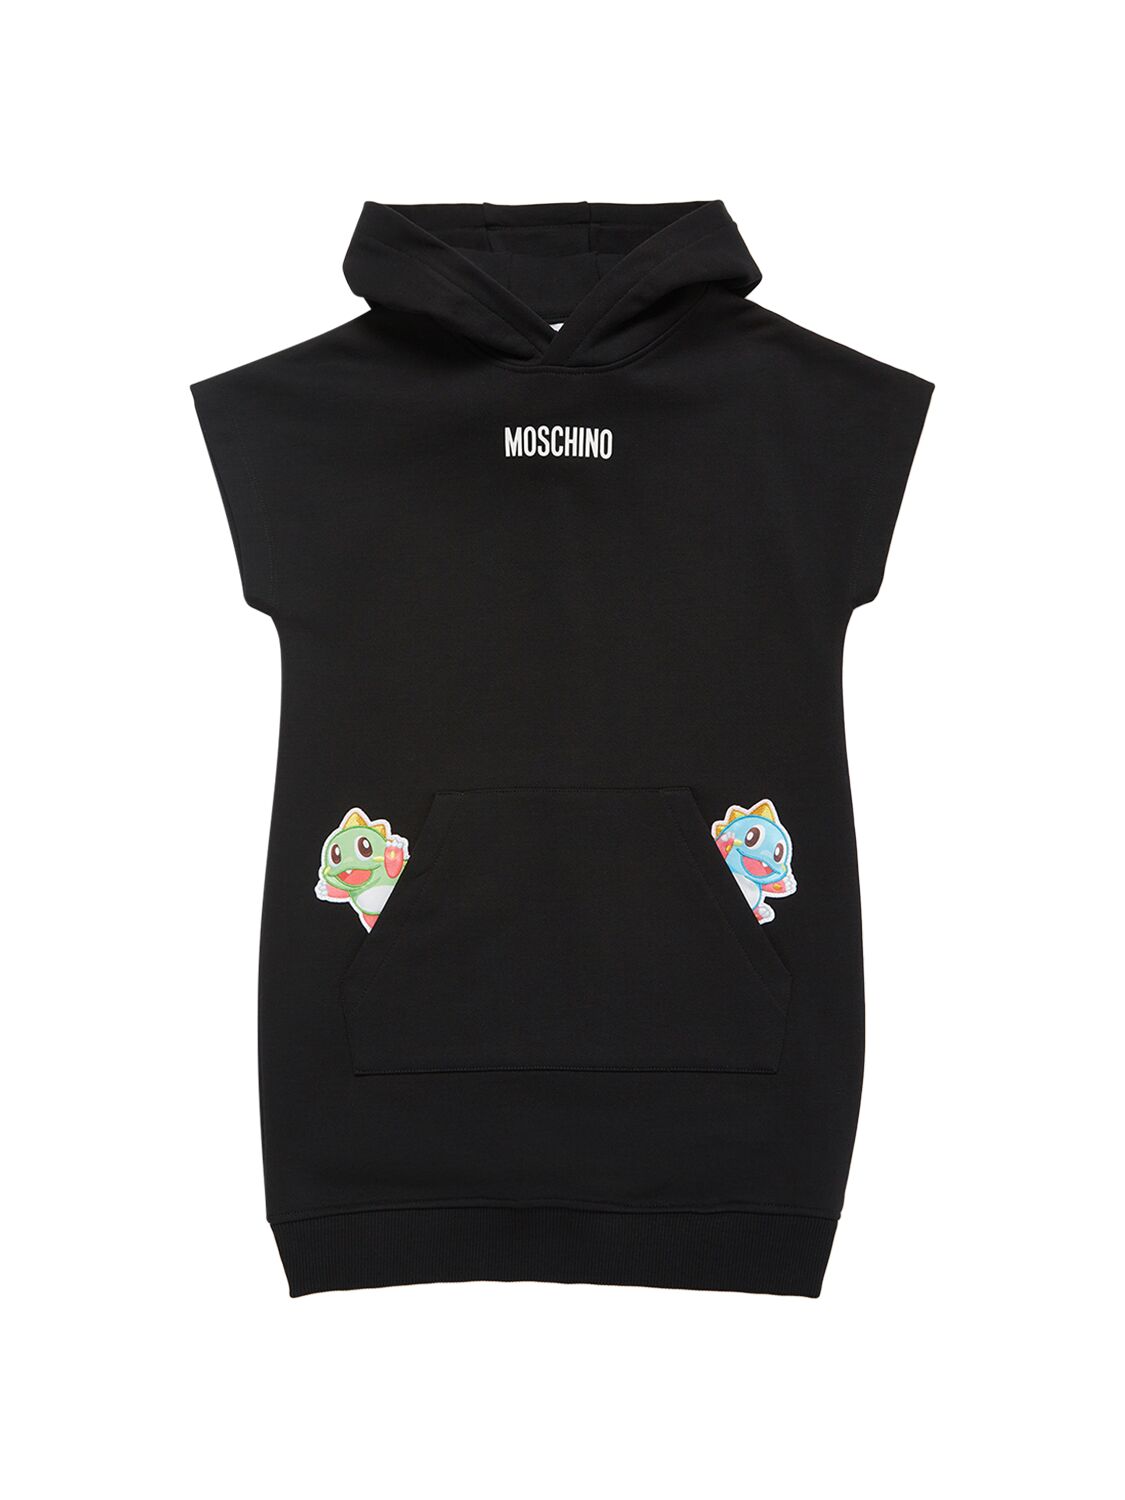 Moschino Kids' Cotton Hooded Dress In Black